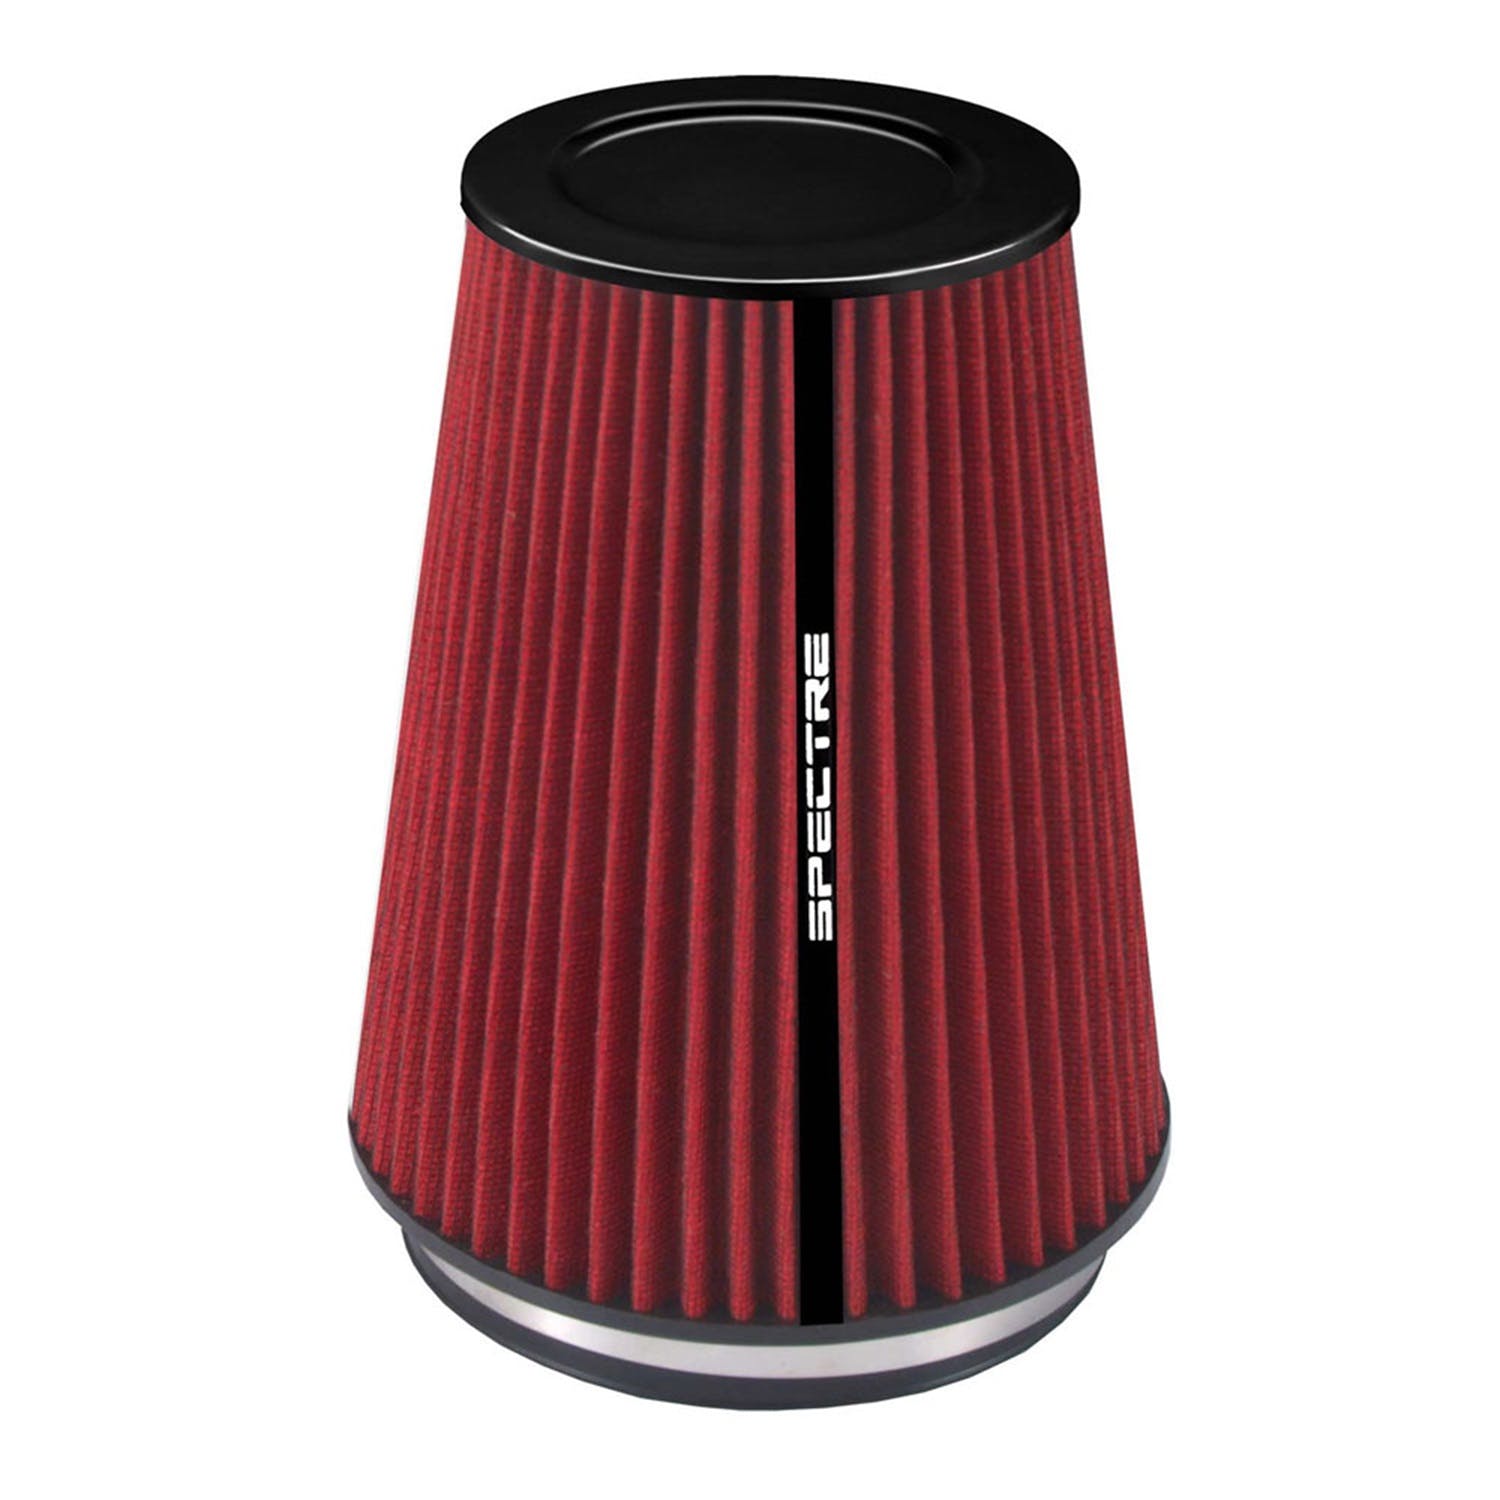 Spectre Performance HPR0881 Spectre Conical Filter